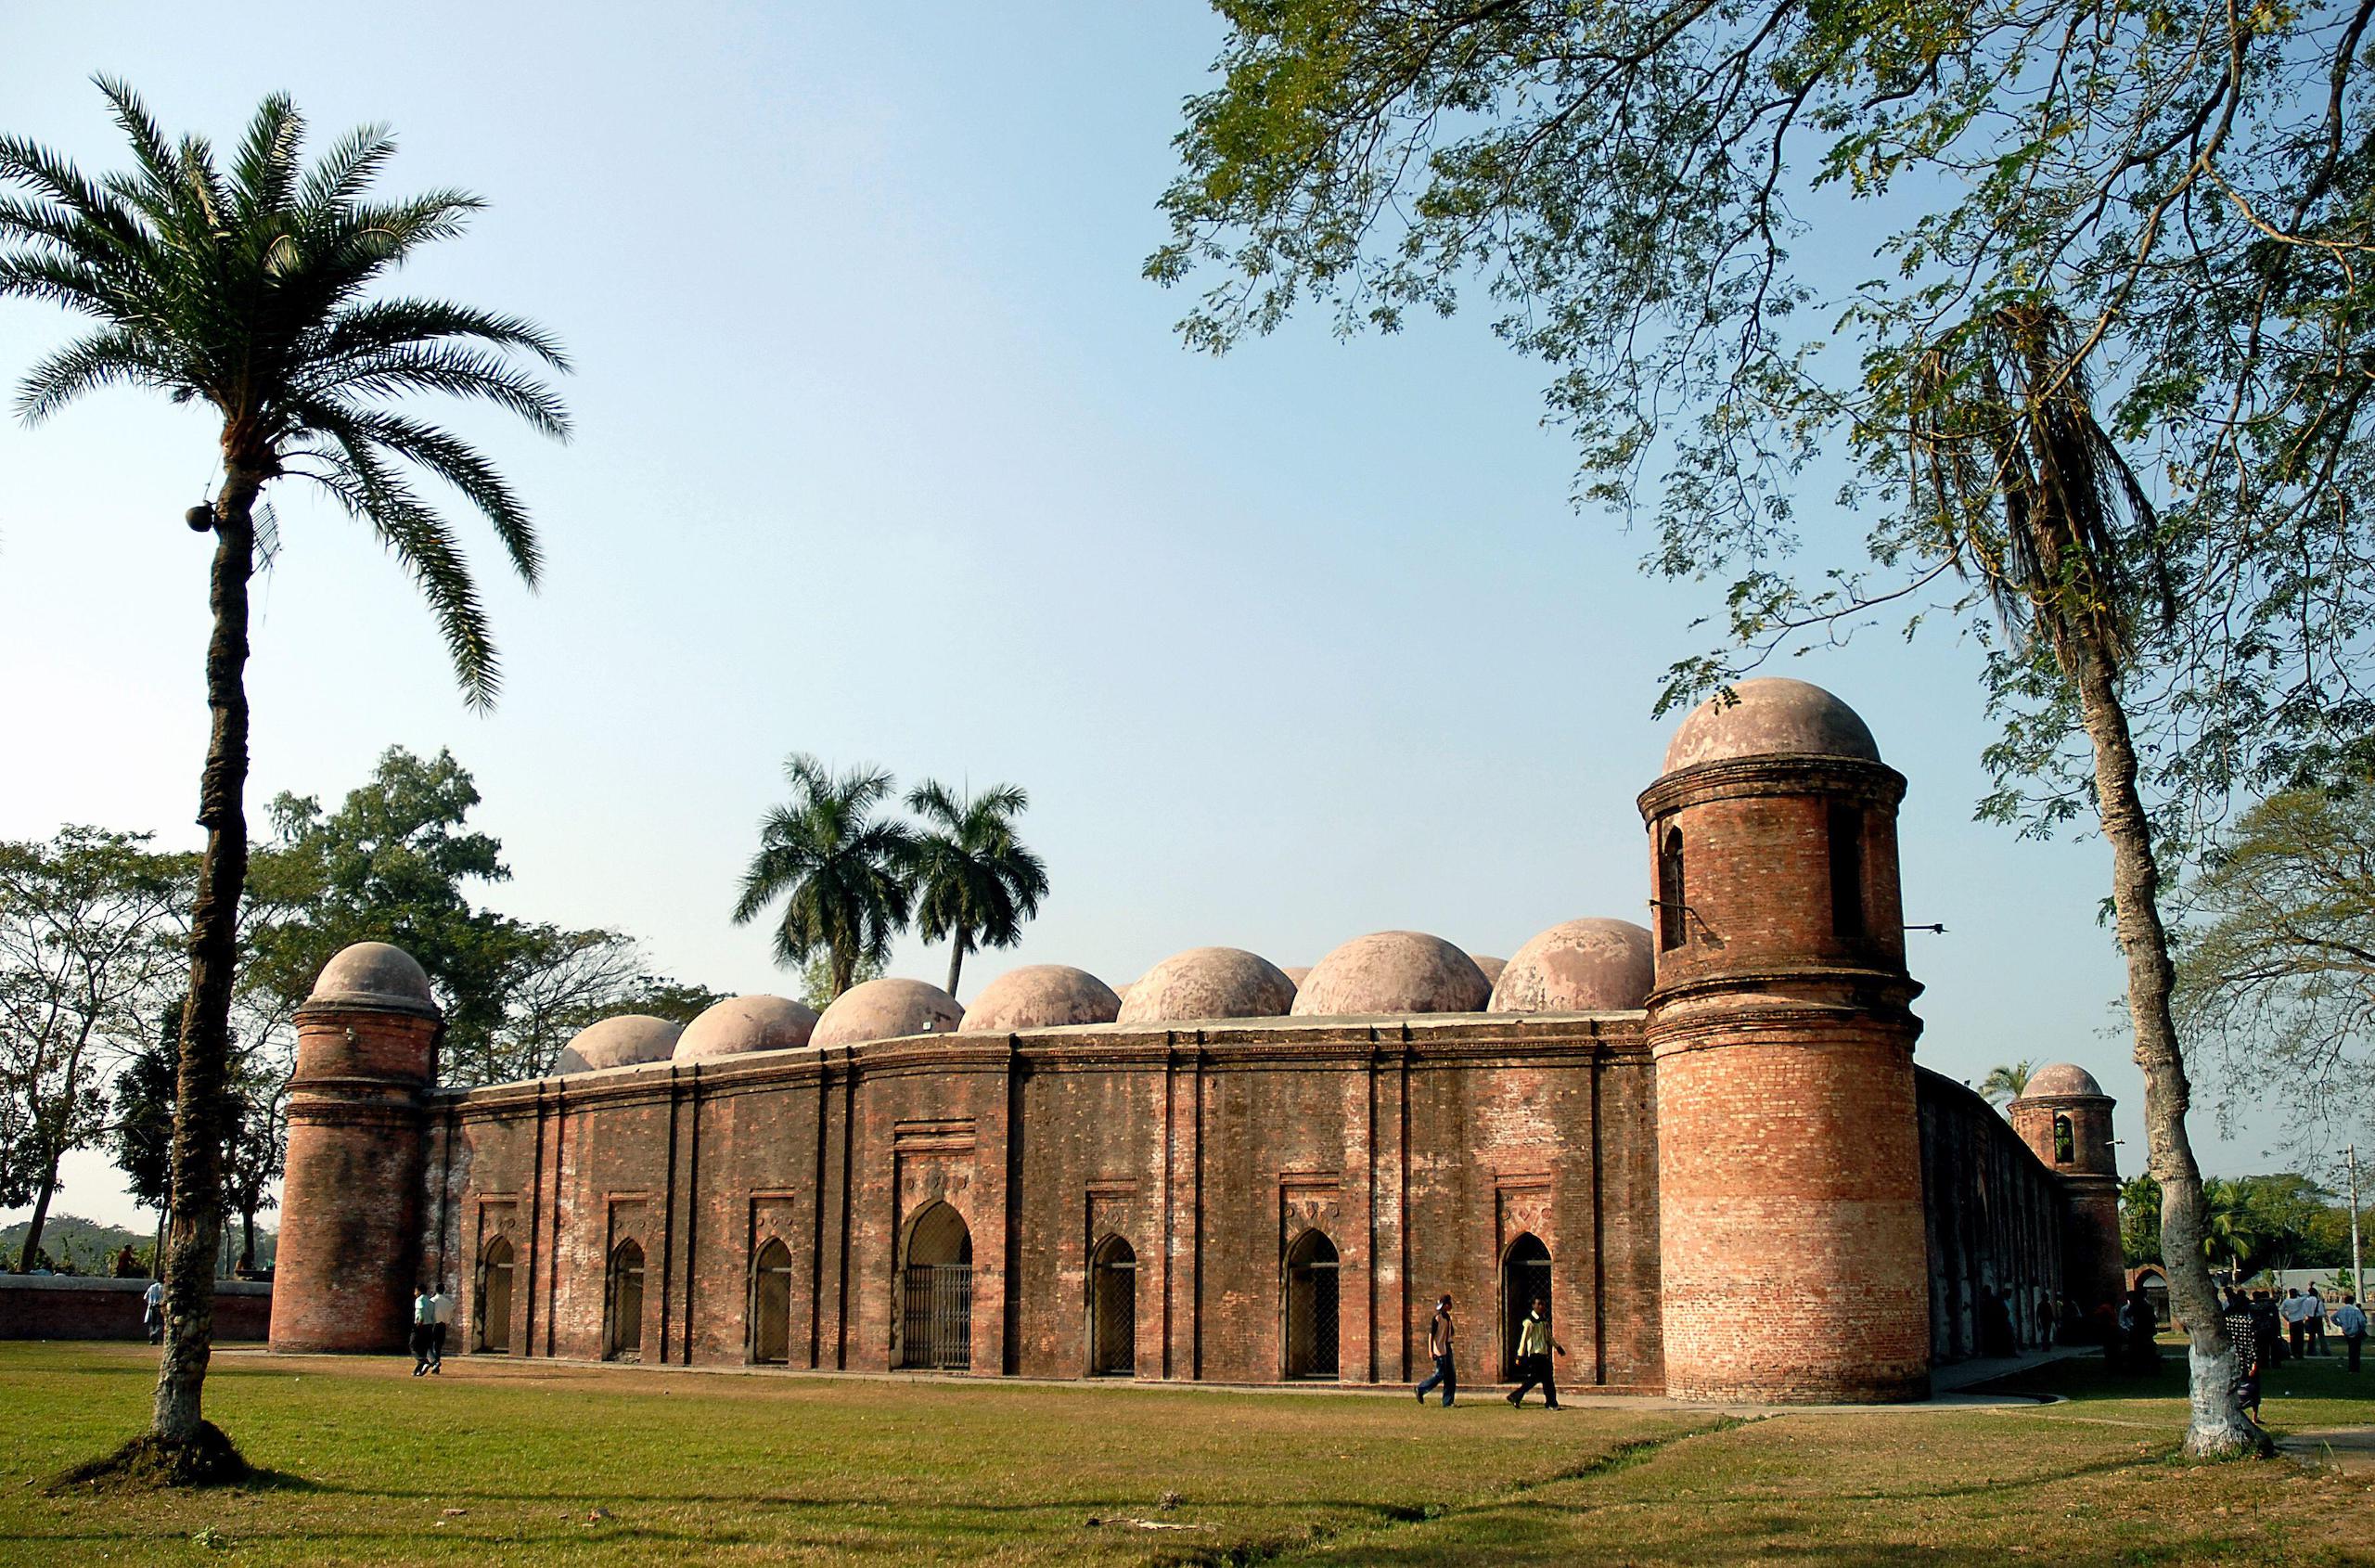 A mosque with many domes